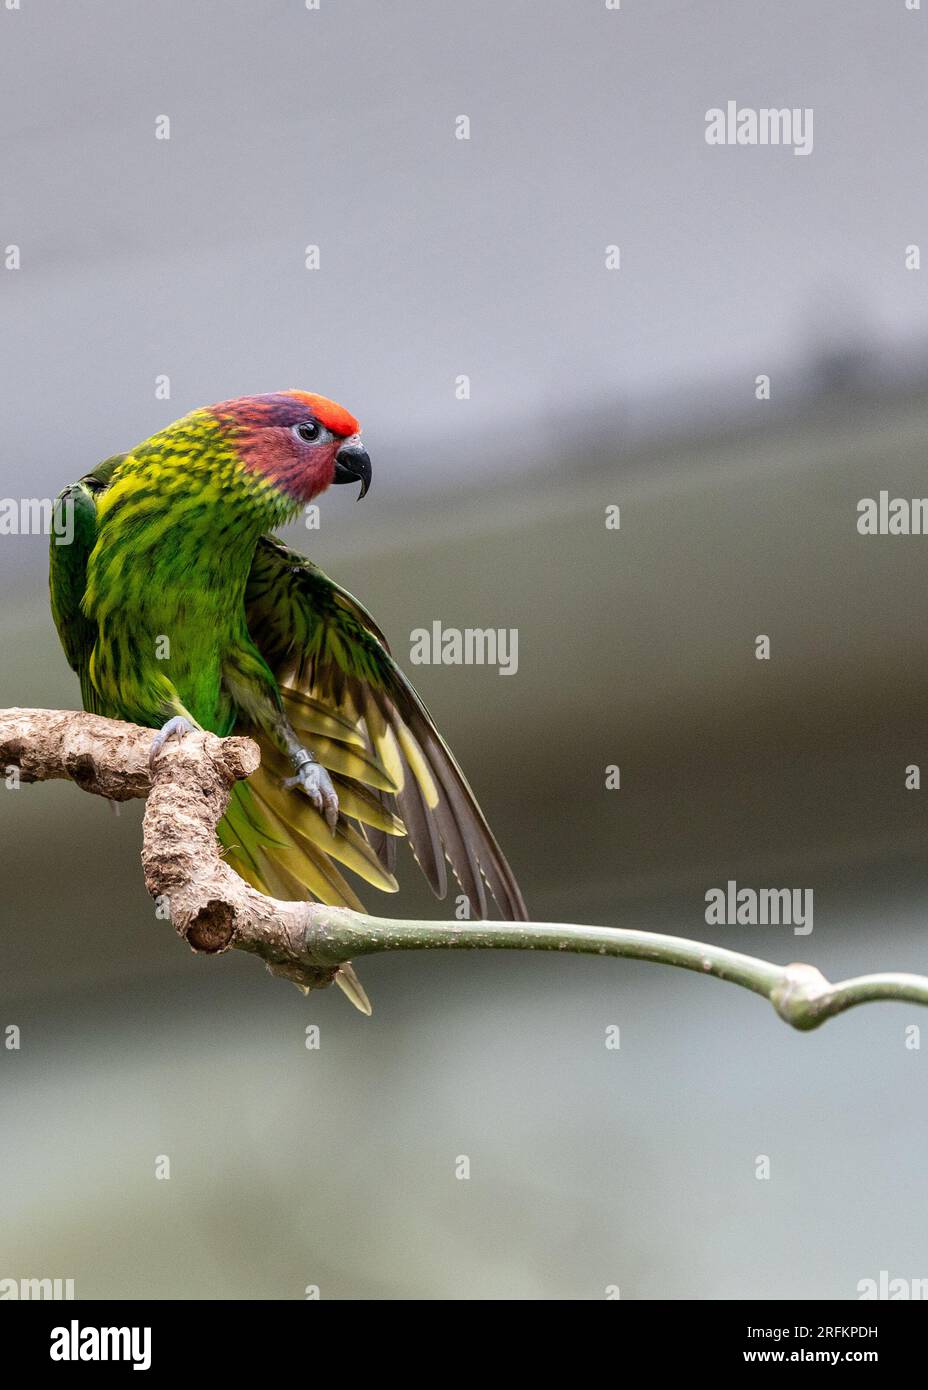 A striking Golden's Lorikeet (Trichoglossus goldiei) displaying its brilliant plumage. This dazzling parrot species is native to the rainforests of Pa Stock Photo